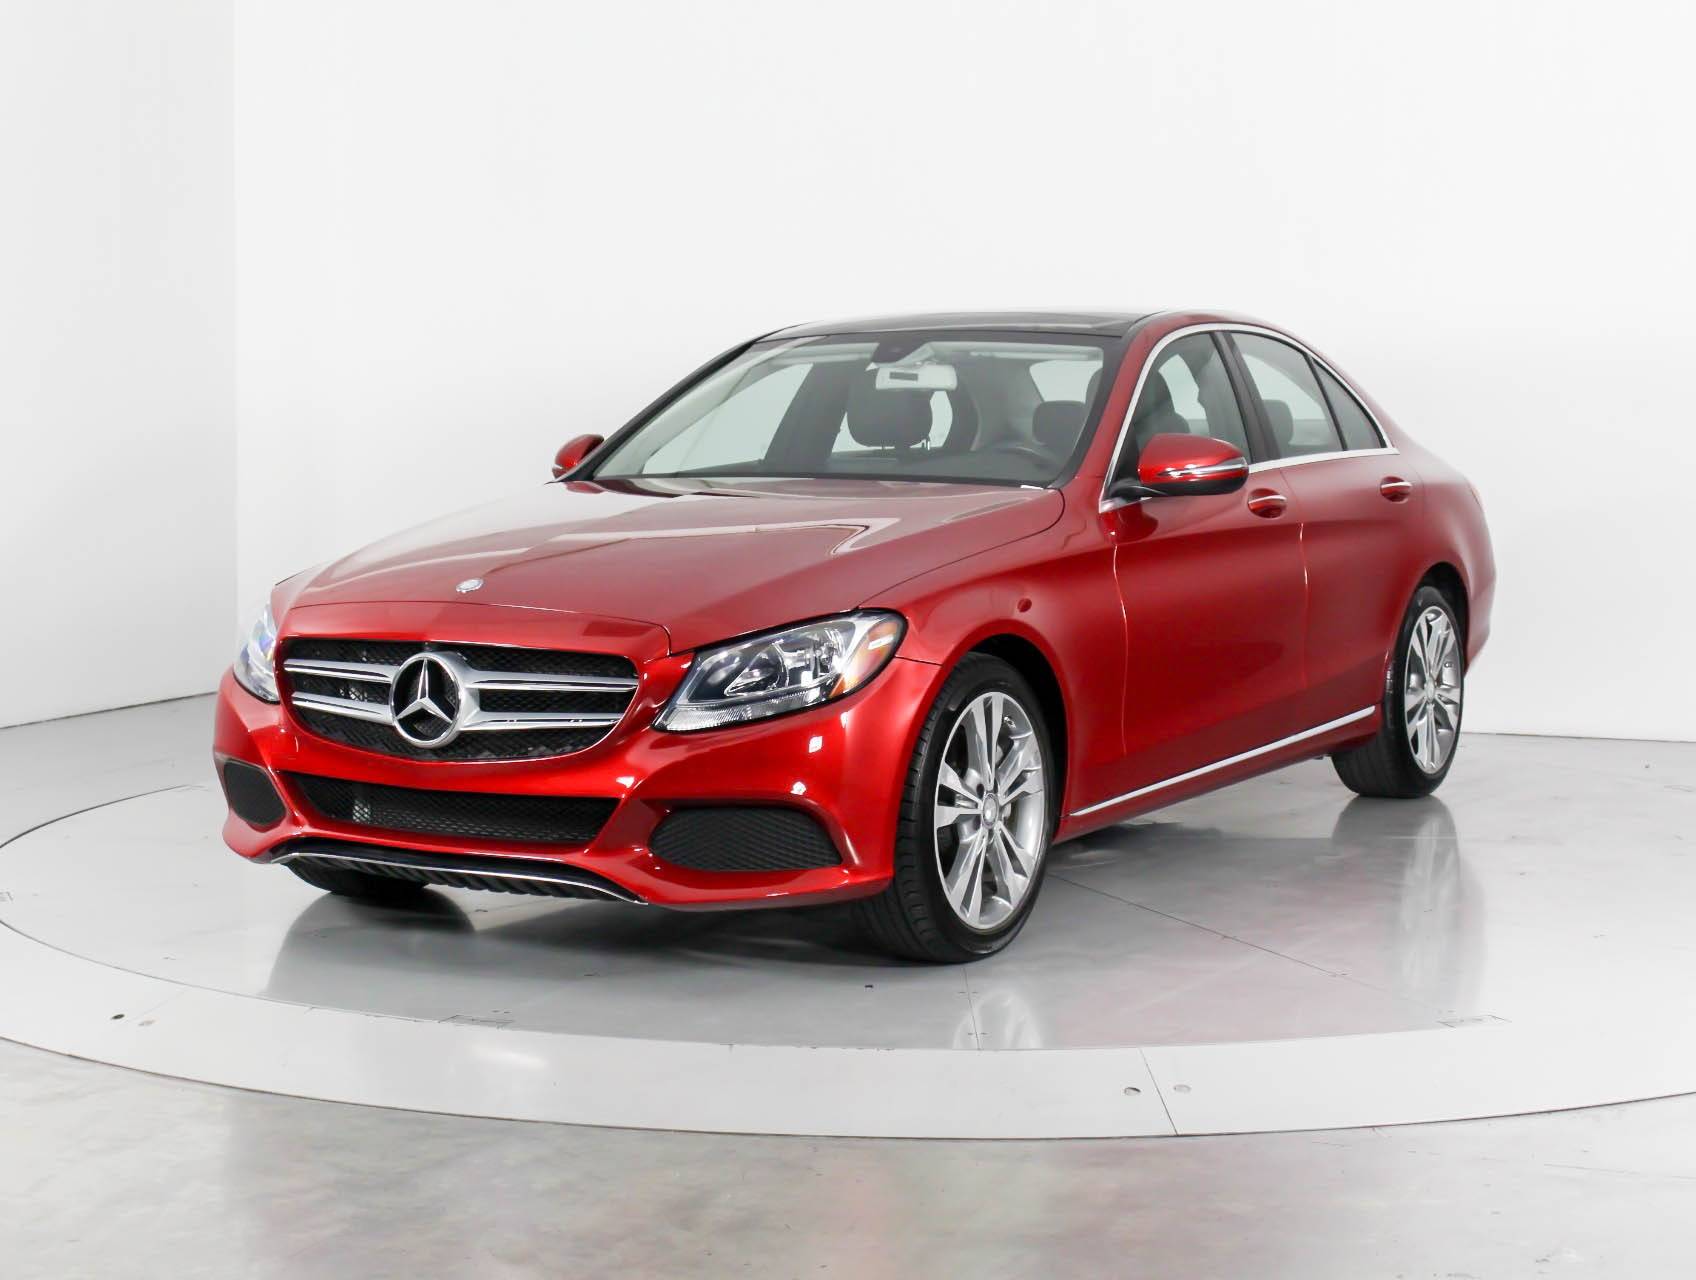 Exciting Features Available on the 2016 MercedesBenz C300